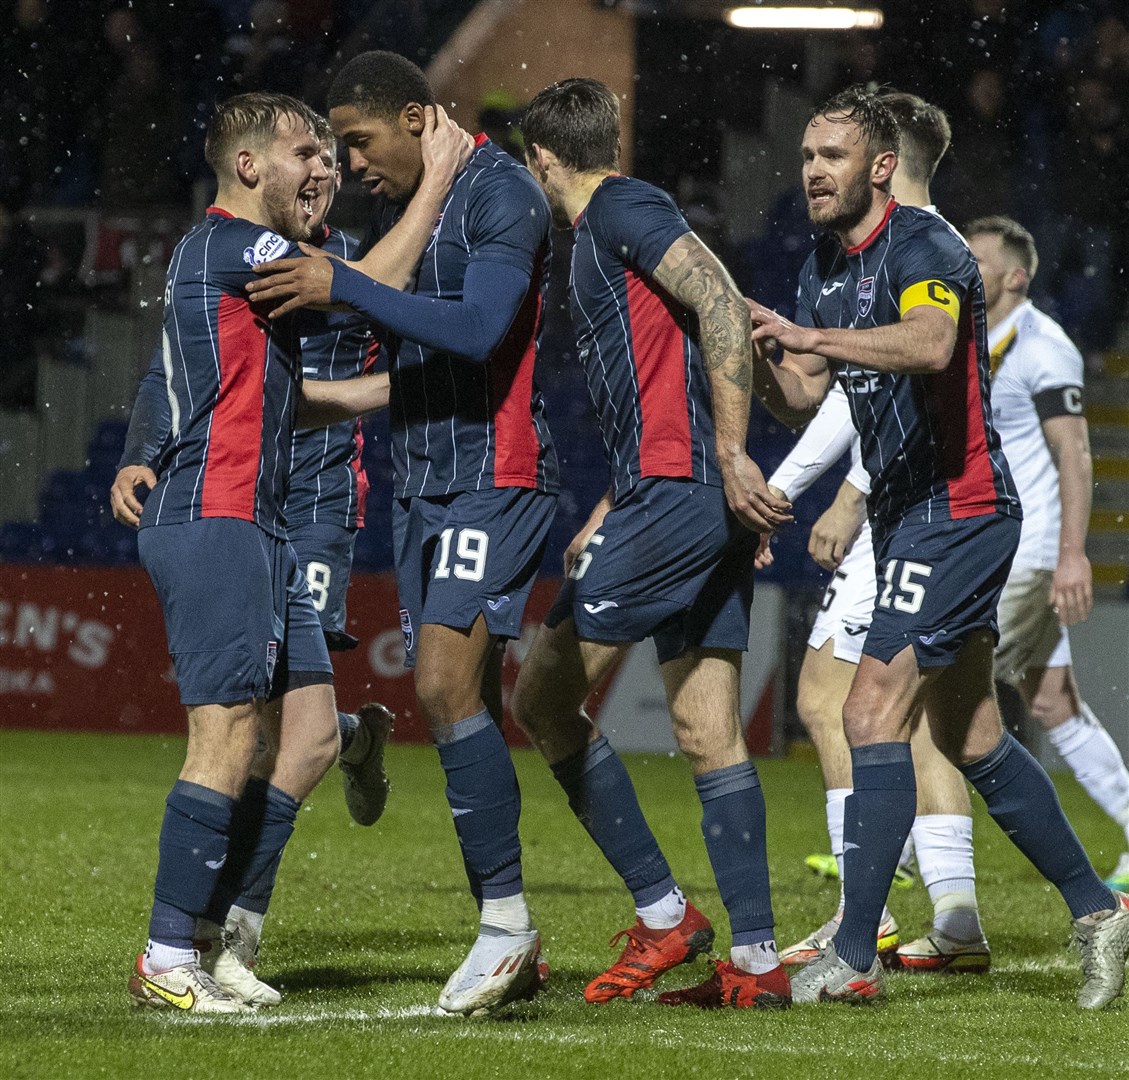 Picture - Ken Macpherson. Ross County(1) v Livingston(1). 09.02.22.. Ross County's Kayne Ramsay celebrates his goal with Jake Vokins.